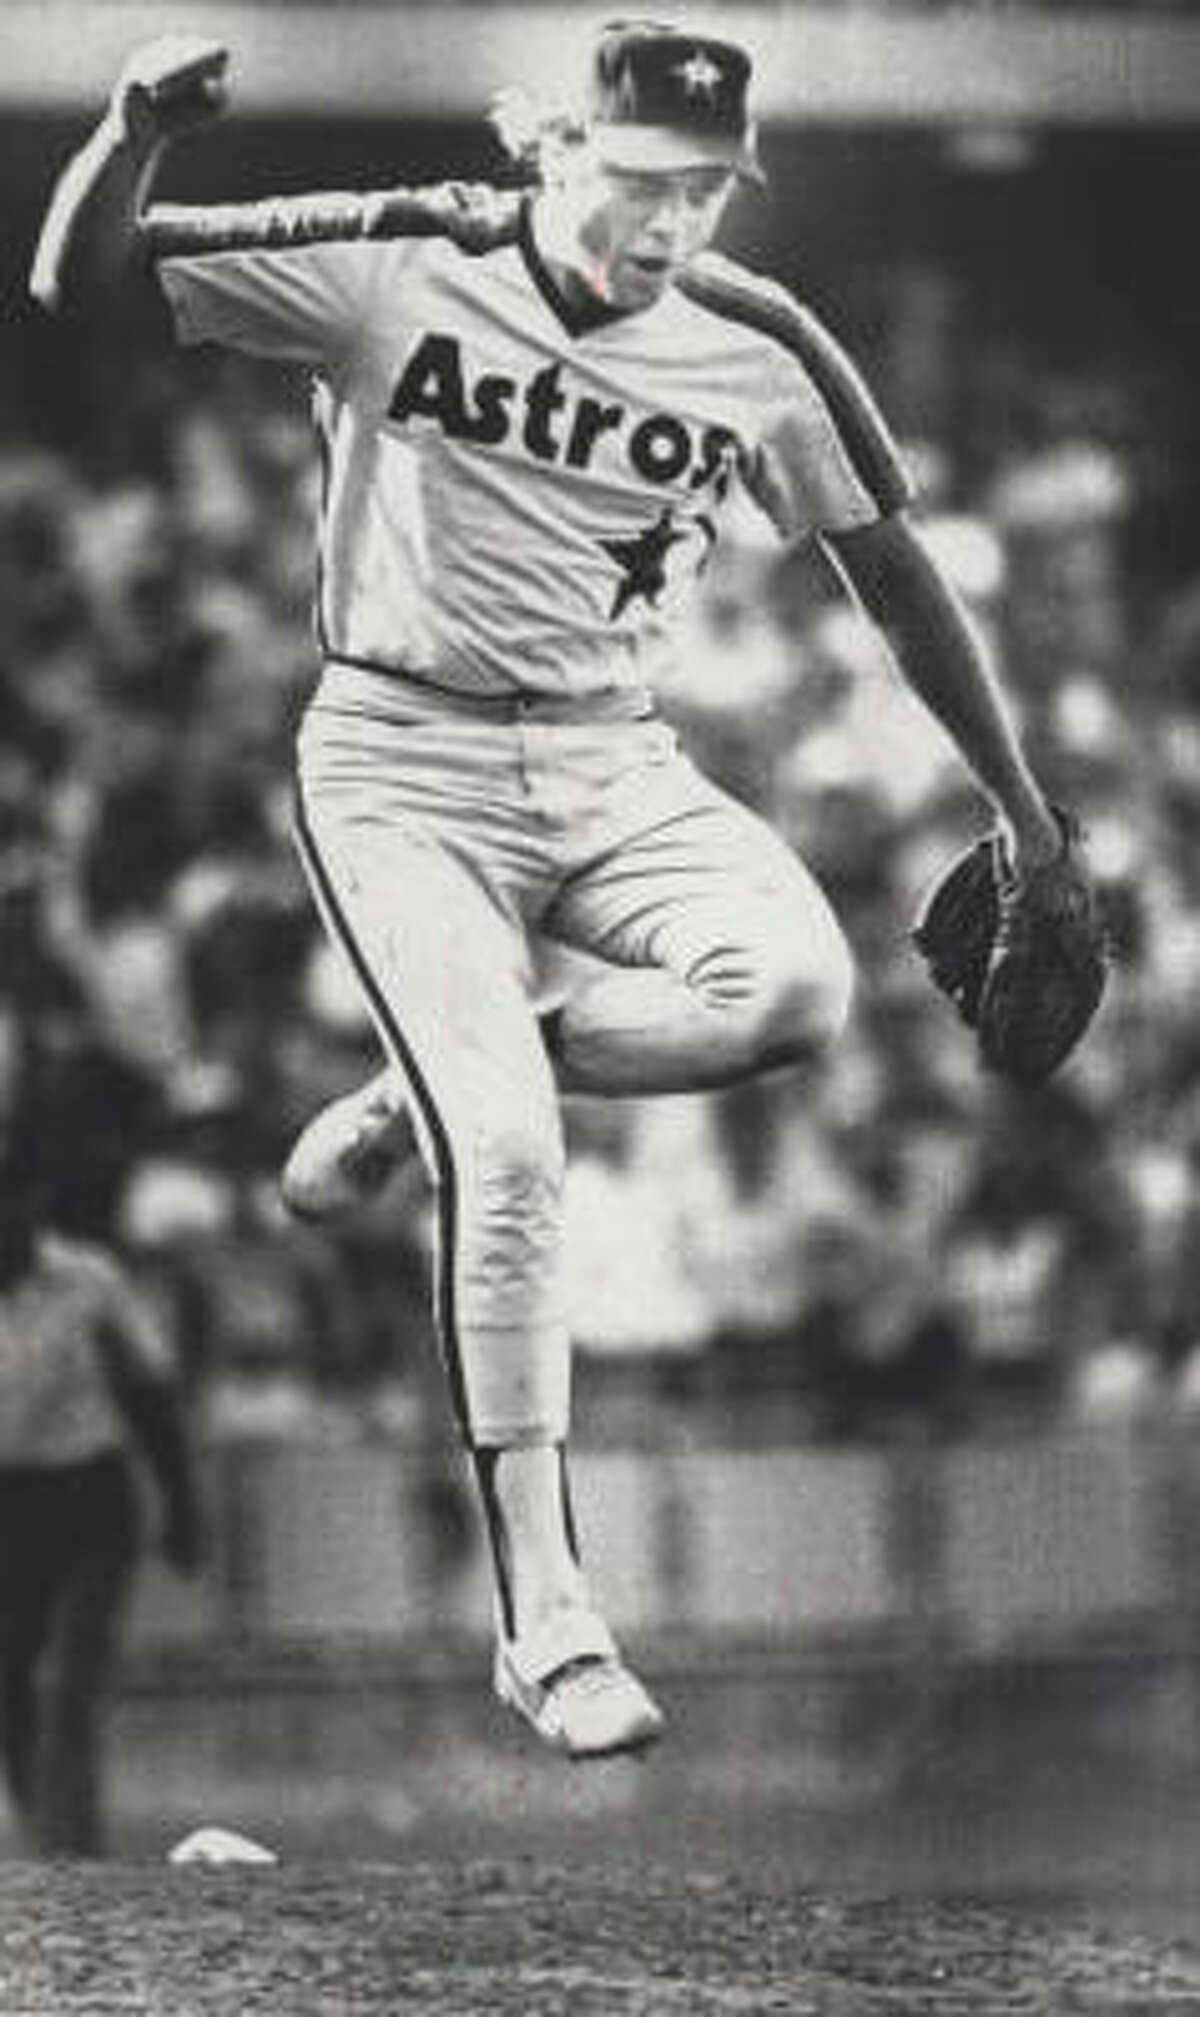 The Astros had a three-game lead on the Los Angeles Dodgers entering the final series of the regular season, but lost all three to force a one-game playoff to decide the National League West. Joe Niekro (above photo) scattered six hits in a complete game to lead the Astros to a 7-1 victory and the first division title in franchise history. The victory sent the Astros to the NL Championship Series to face the Philadelphia Phillies.